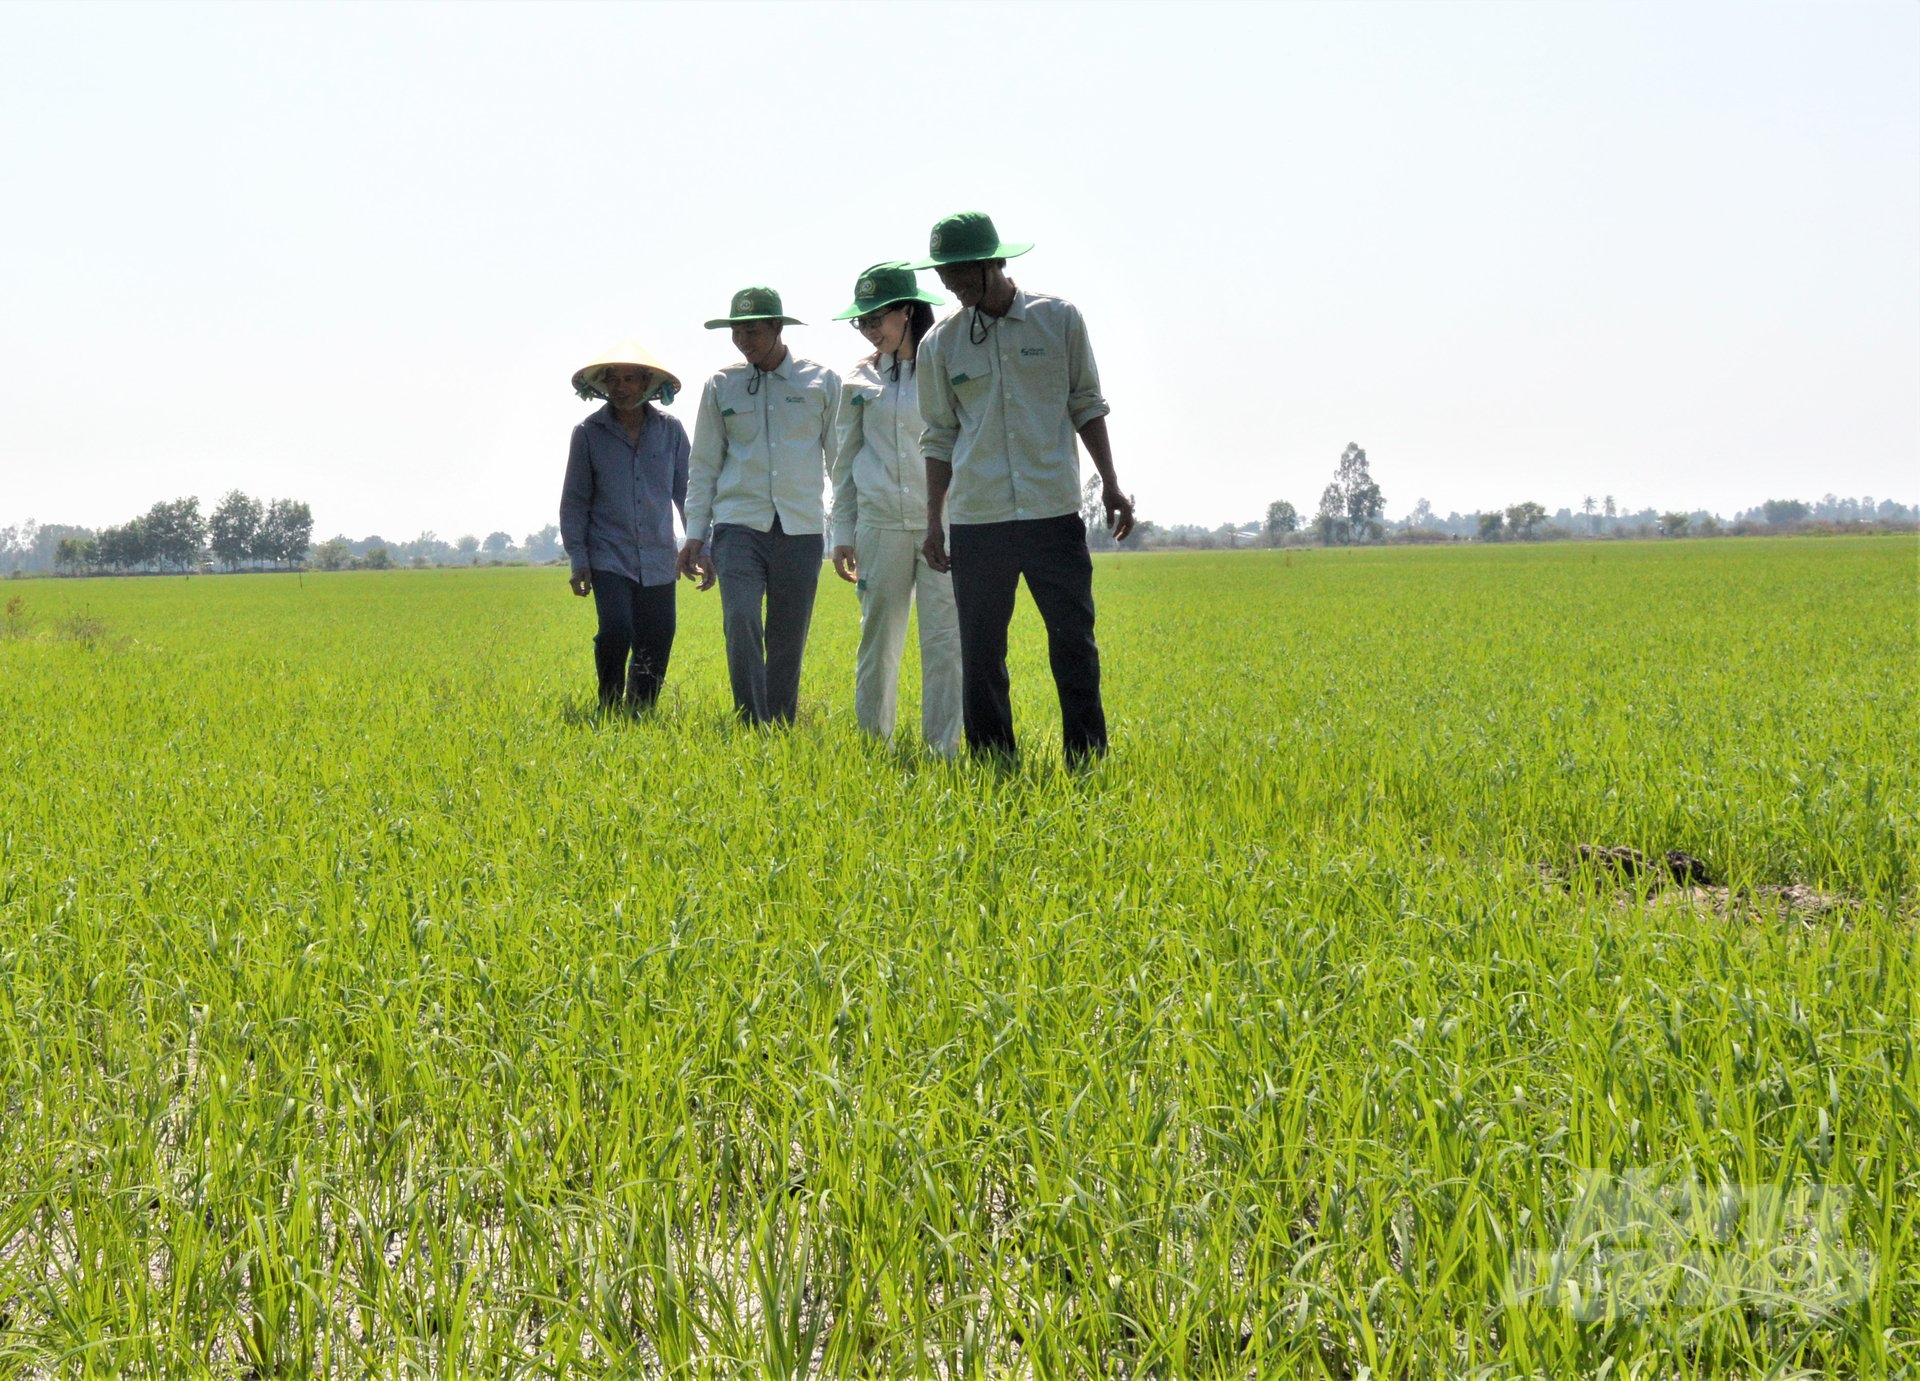 The community extension force supports farmers to apply sustainable rice production standards, adapt to climate change, reduce greenhouse gas emissions, and improve income. Photo: Trung Chanh.